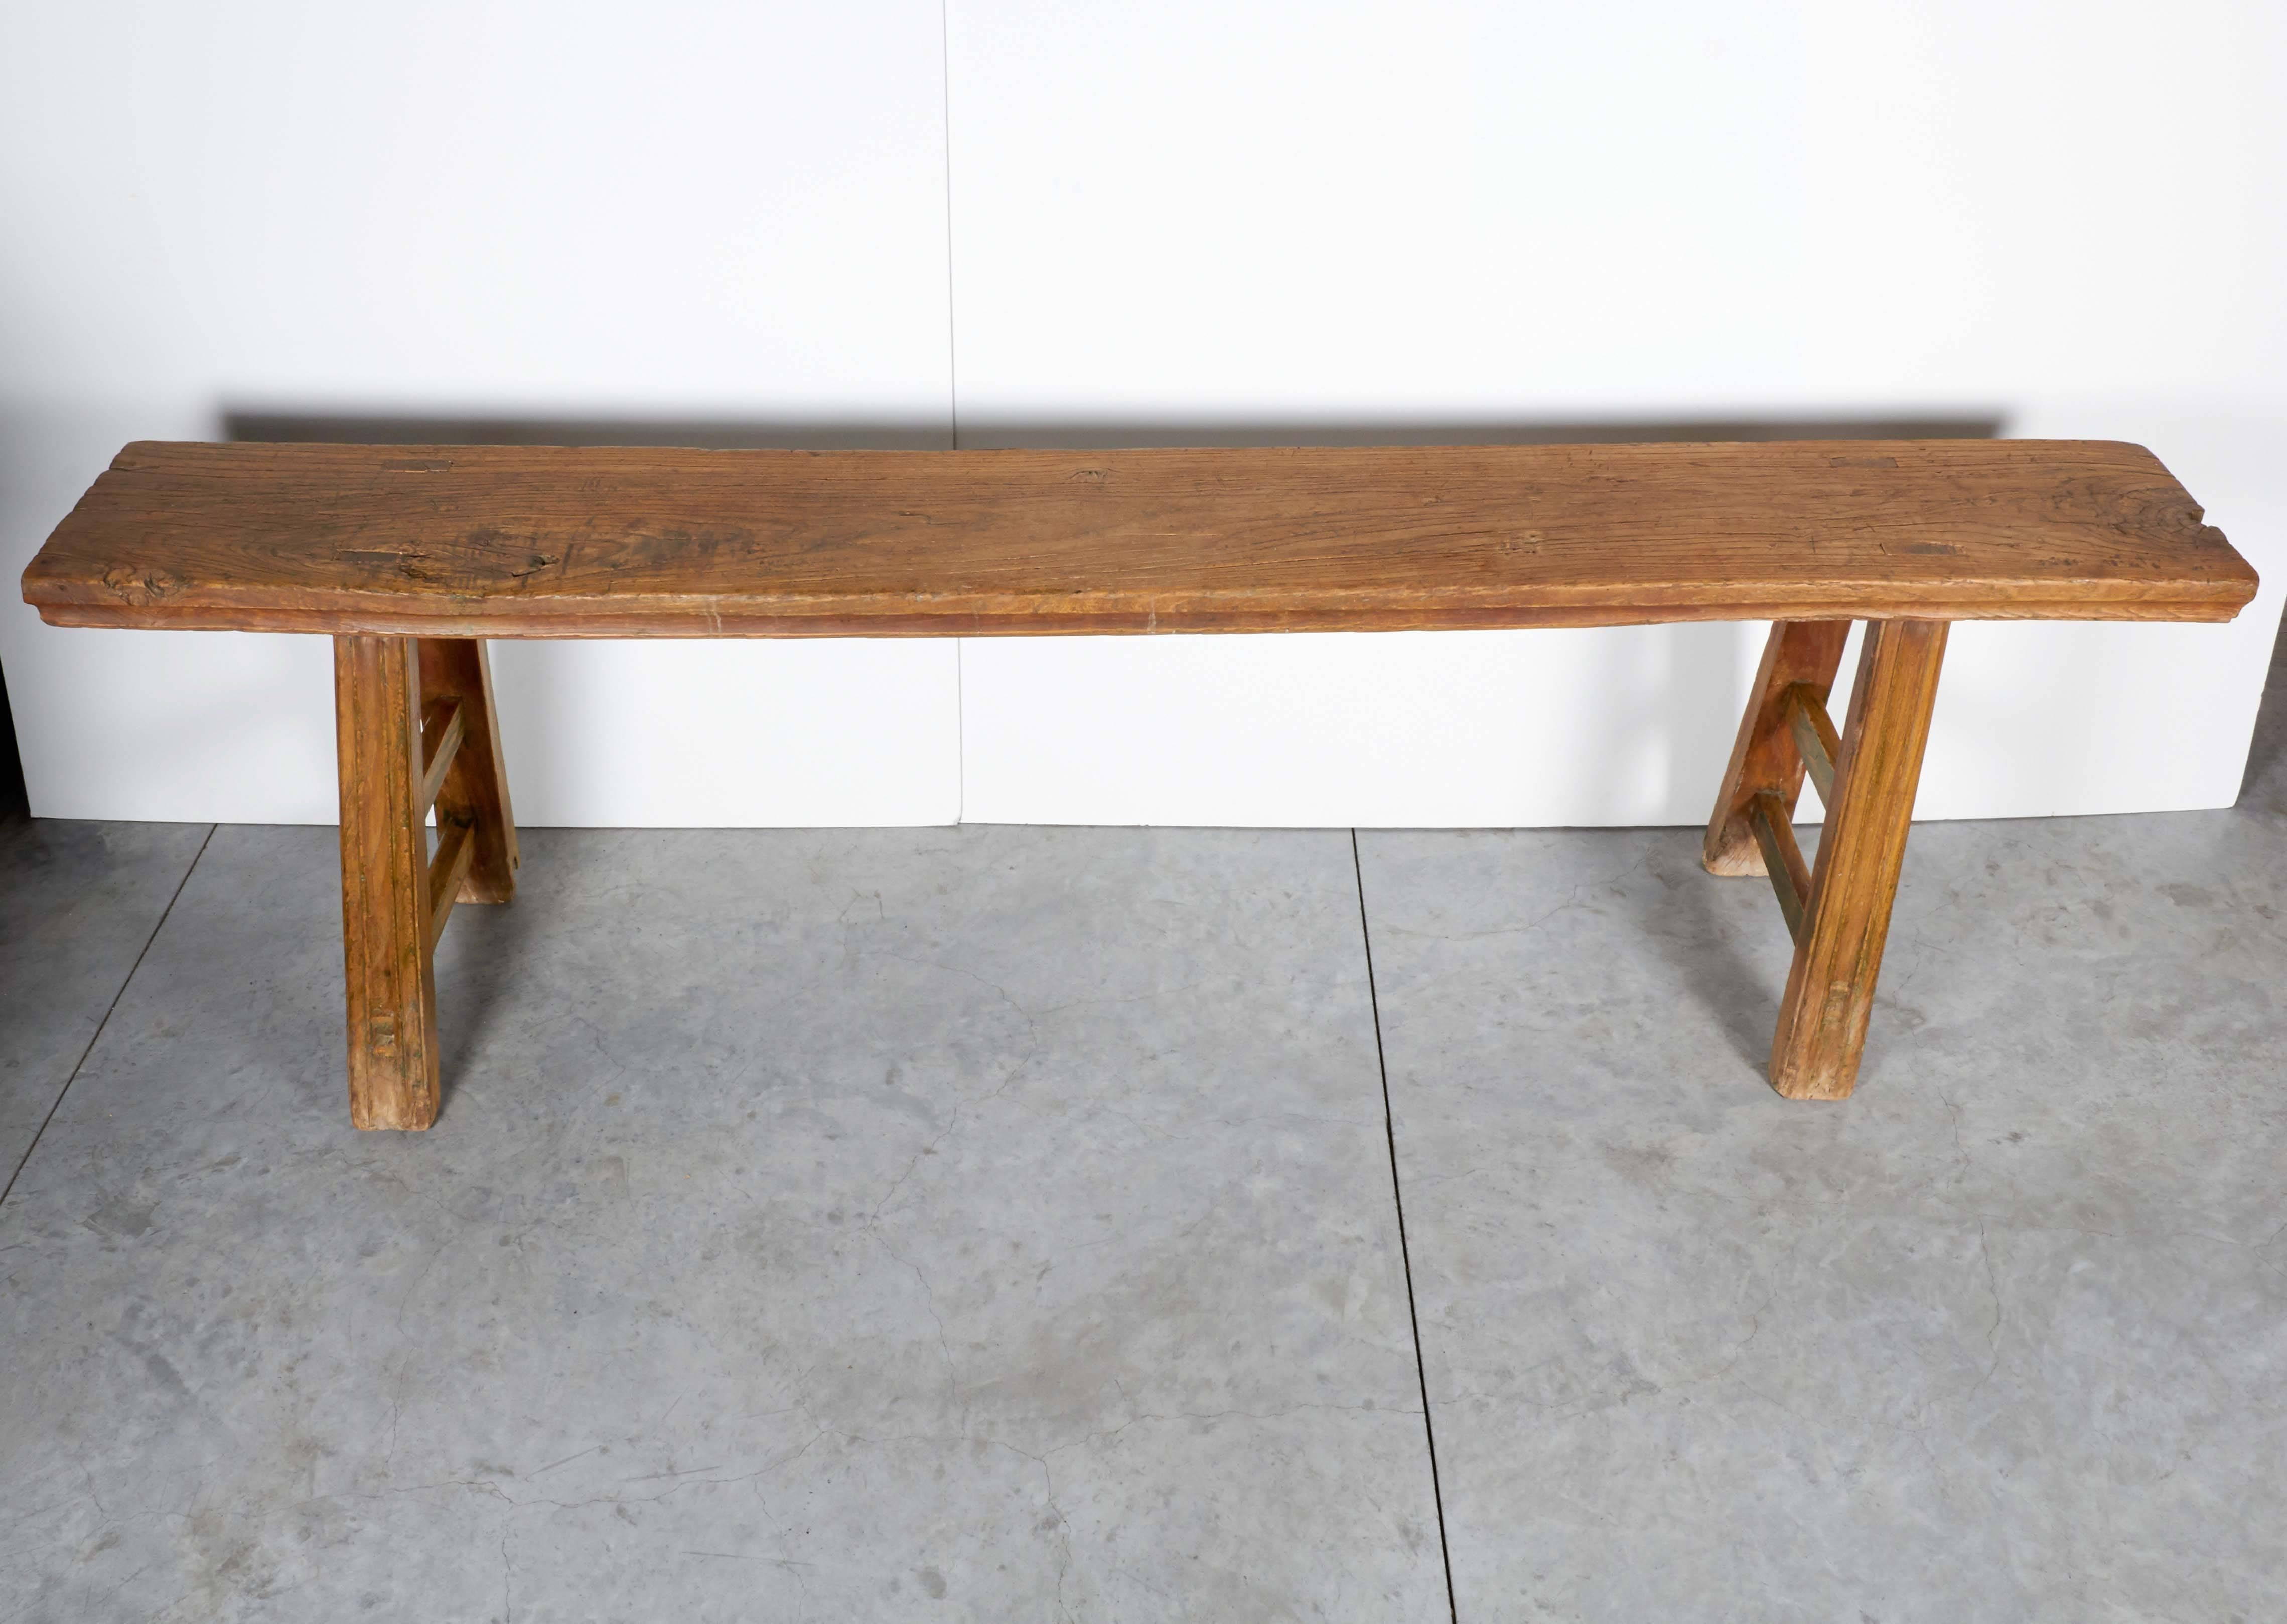 A tall country bench with a solid top made of a single piece of two and half inch thick elm wood. From Shandong Province, circa 1880.

BN333.